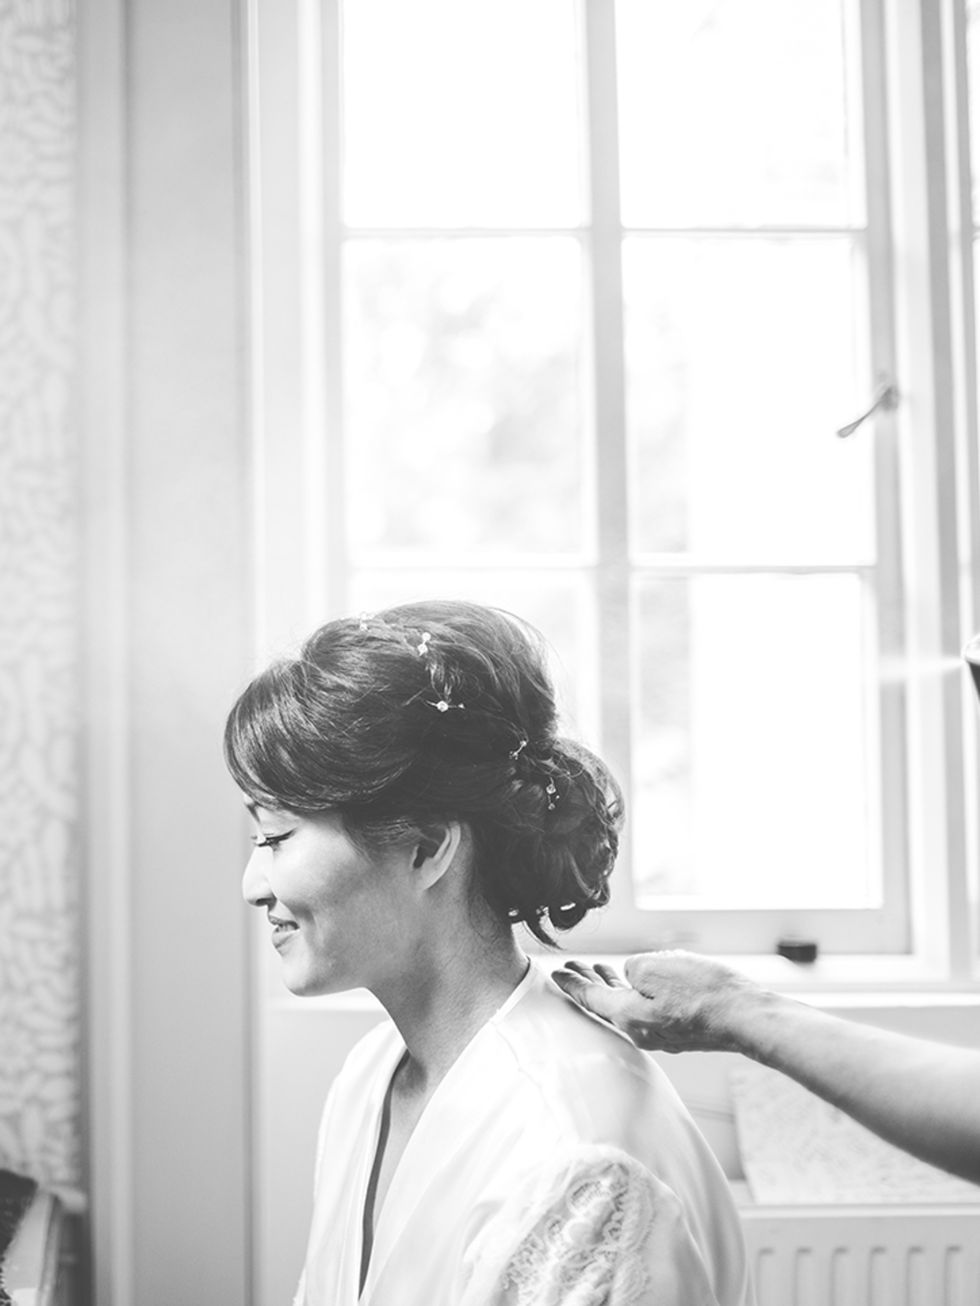 <p><a href="http://www.weddingmakeupandhair.com/" target="_blank">Pam Wrigley</a>, the winner of the 2013 National Wedding Industry Award, did my hair and makeup. She created a curled, chignon-style, incorporating braids and a subtle hair-vine.</p>

<p>Sh